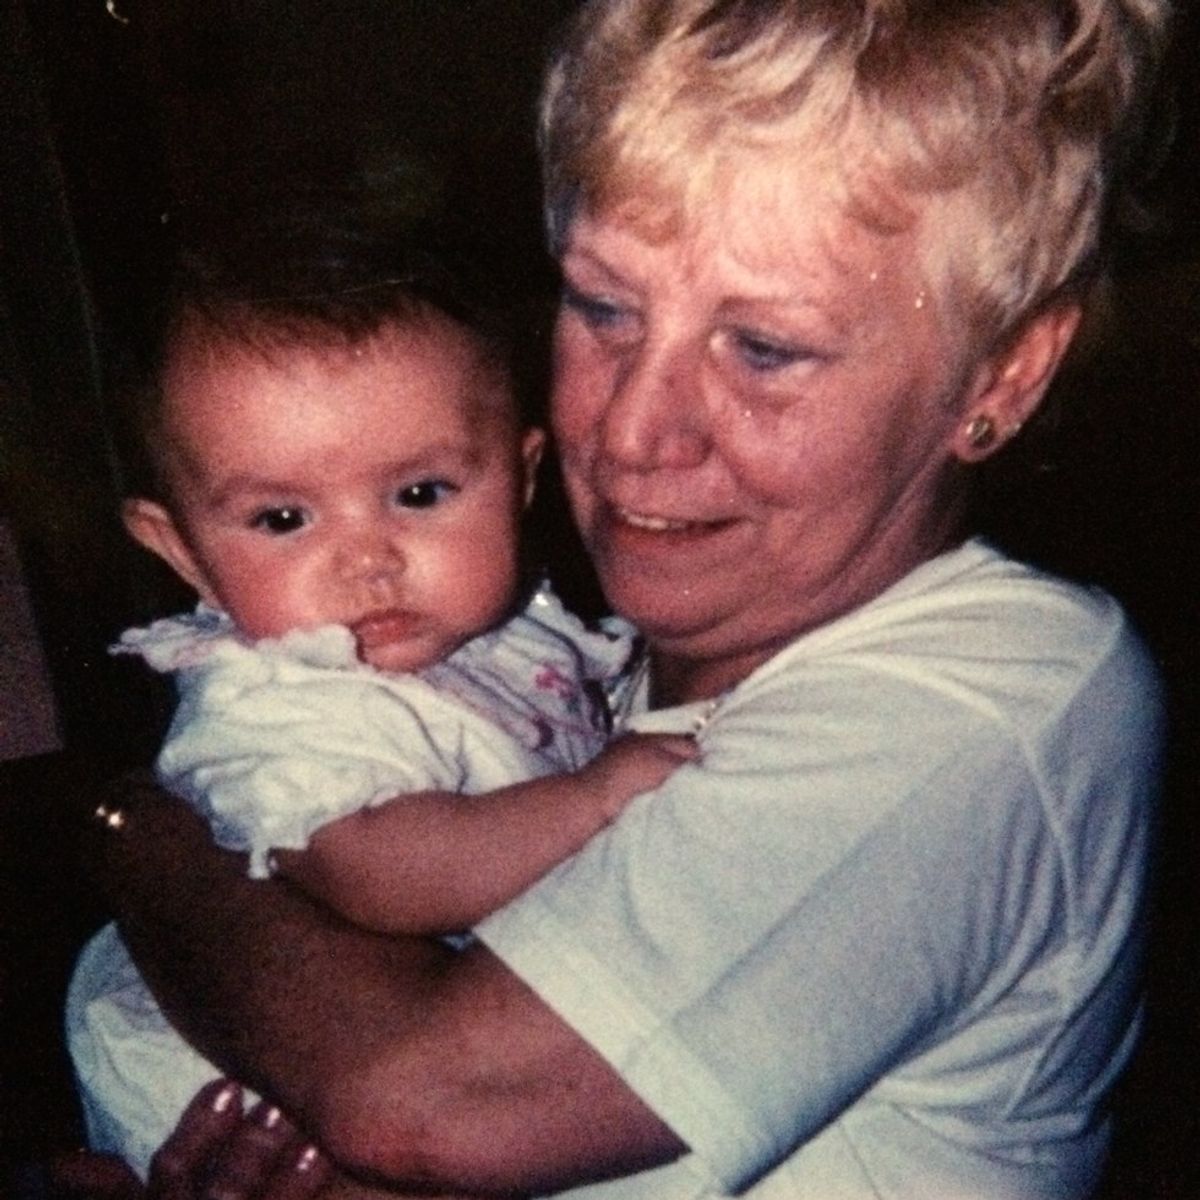 Losing a Grandparent Changed My Life